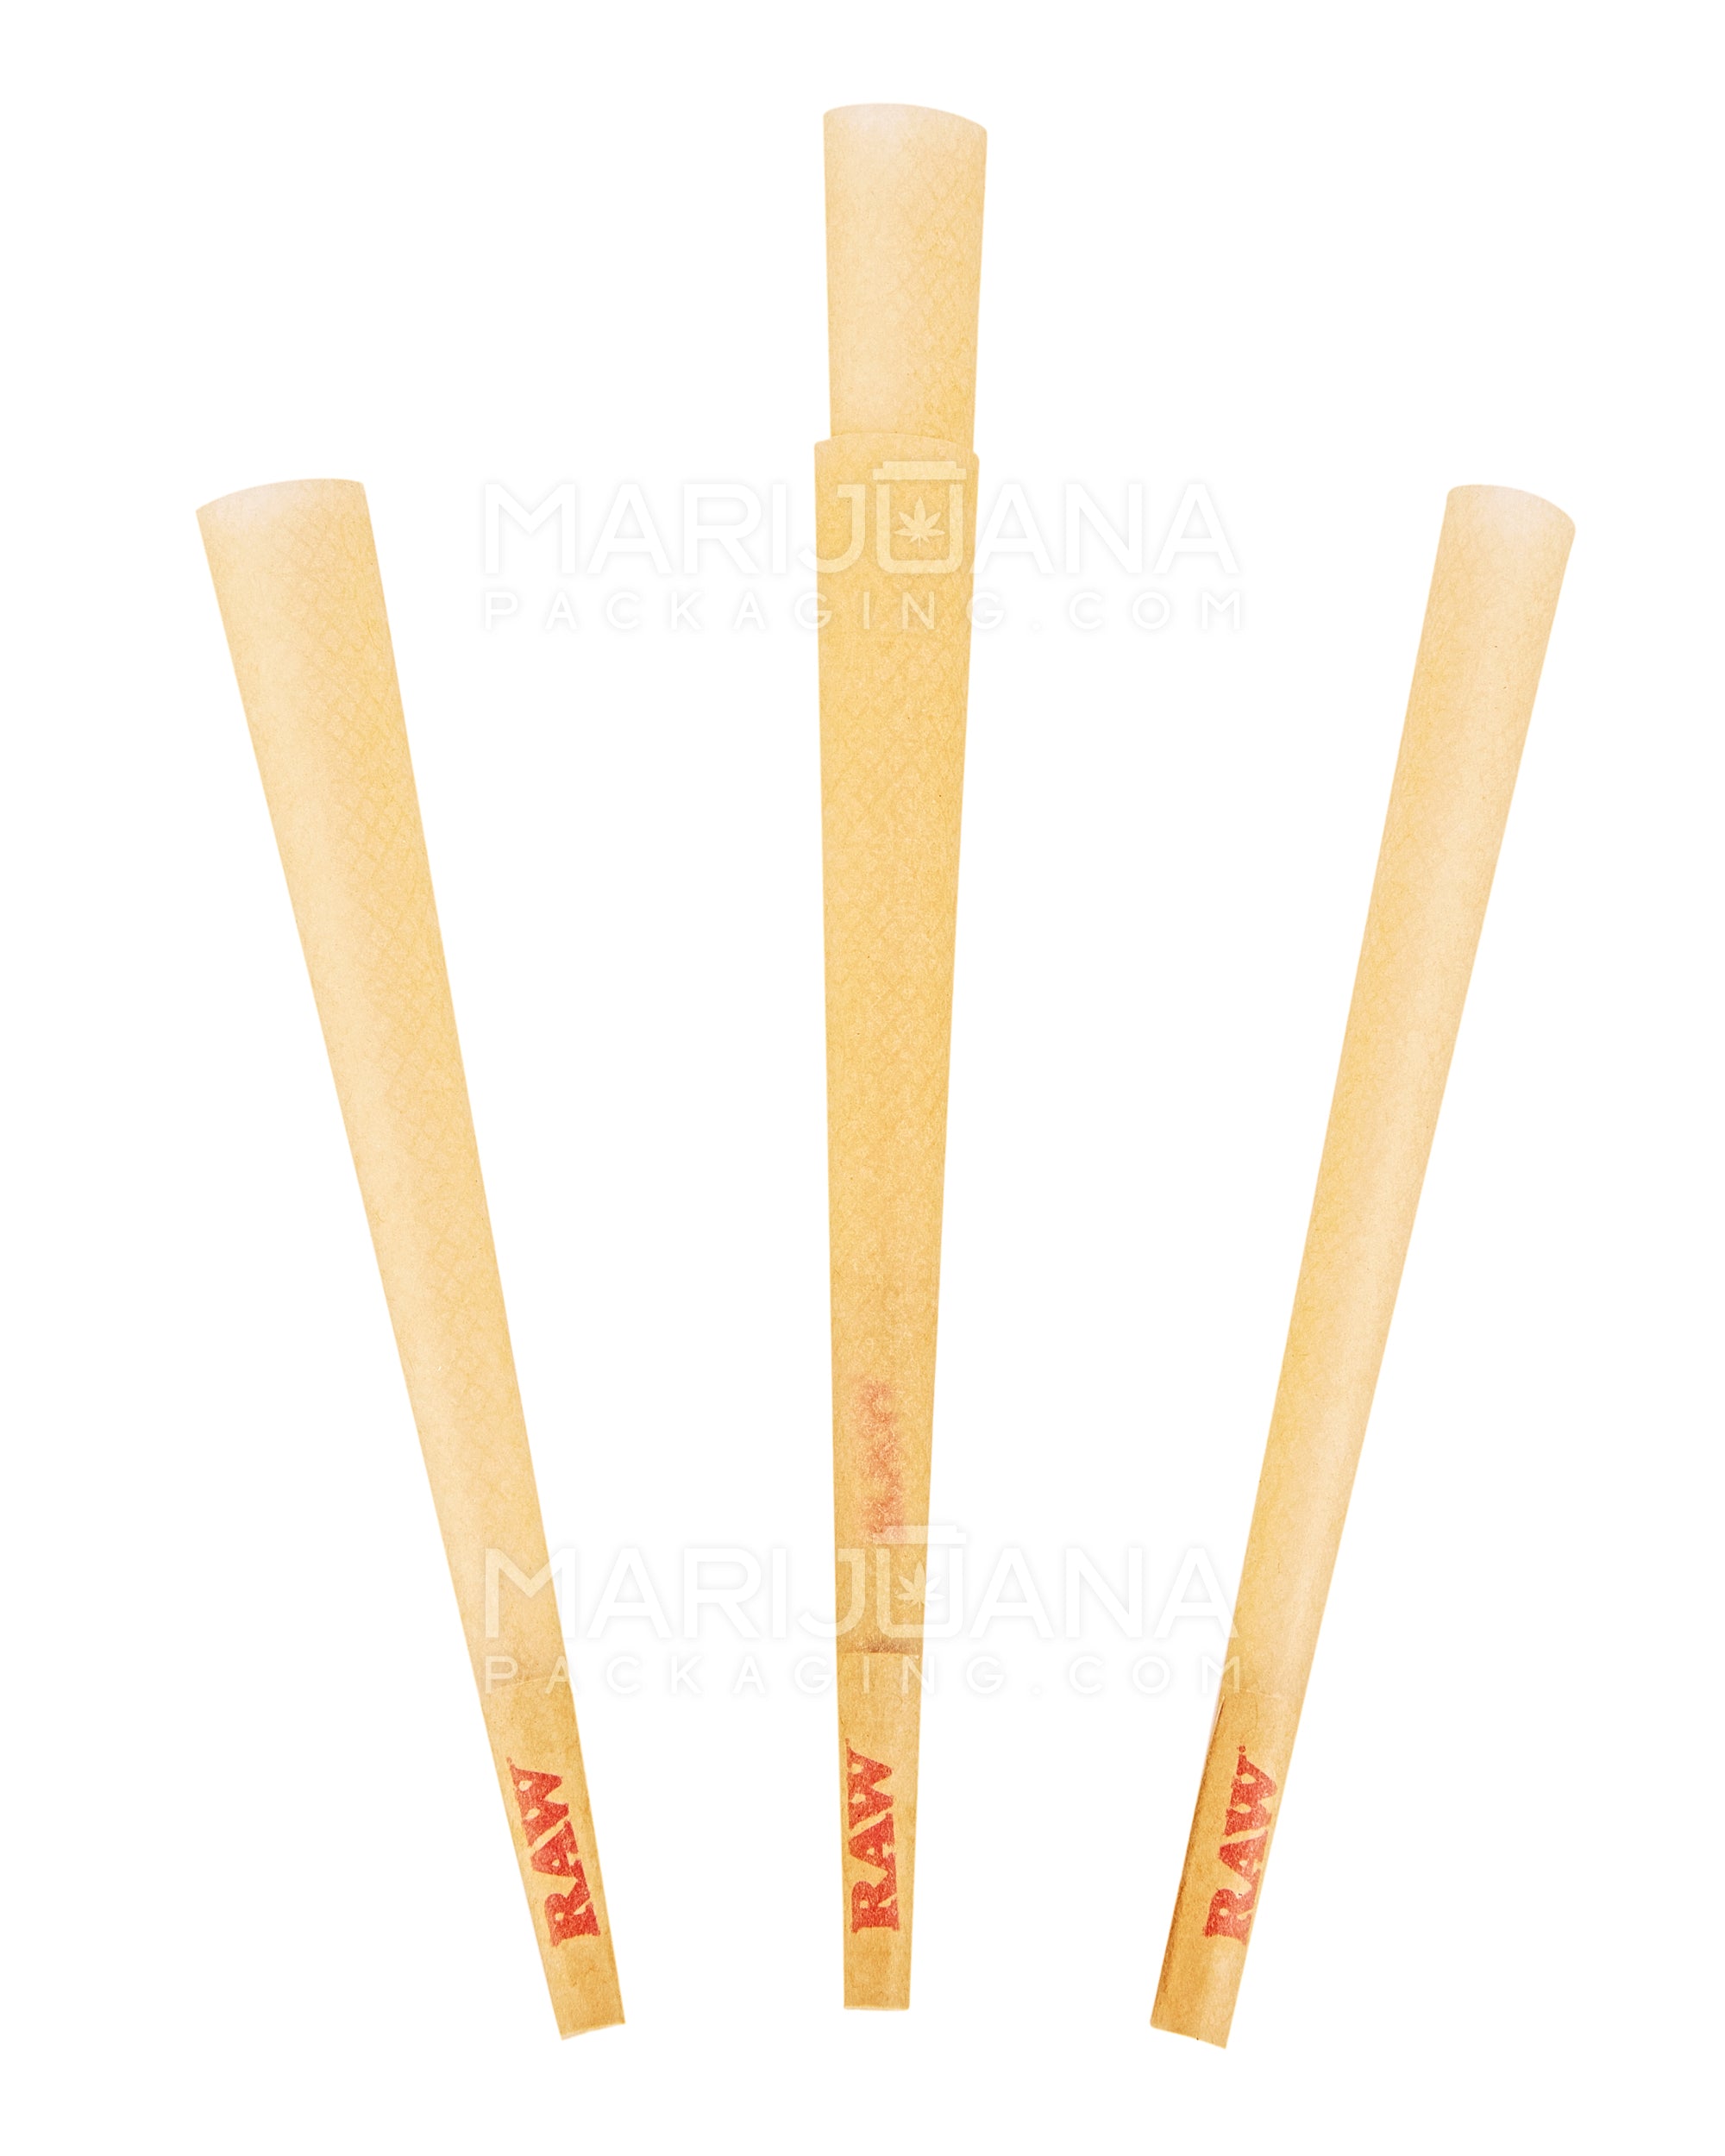 RAW | Peacemaker Pre-Rolled Cones | 140mm - Unbleached Paper - 486 Count - 3